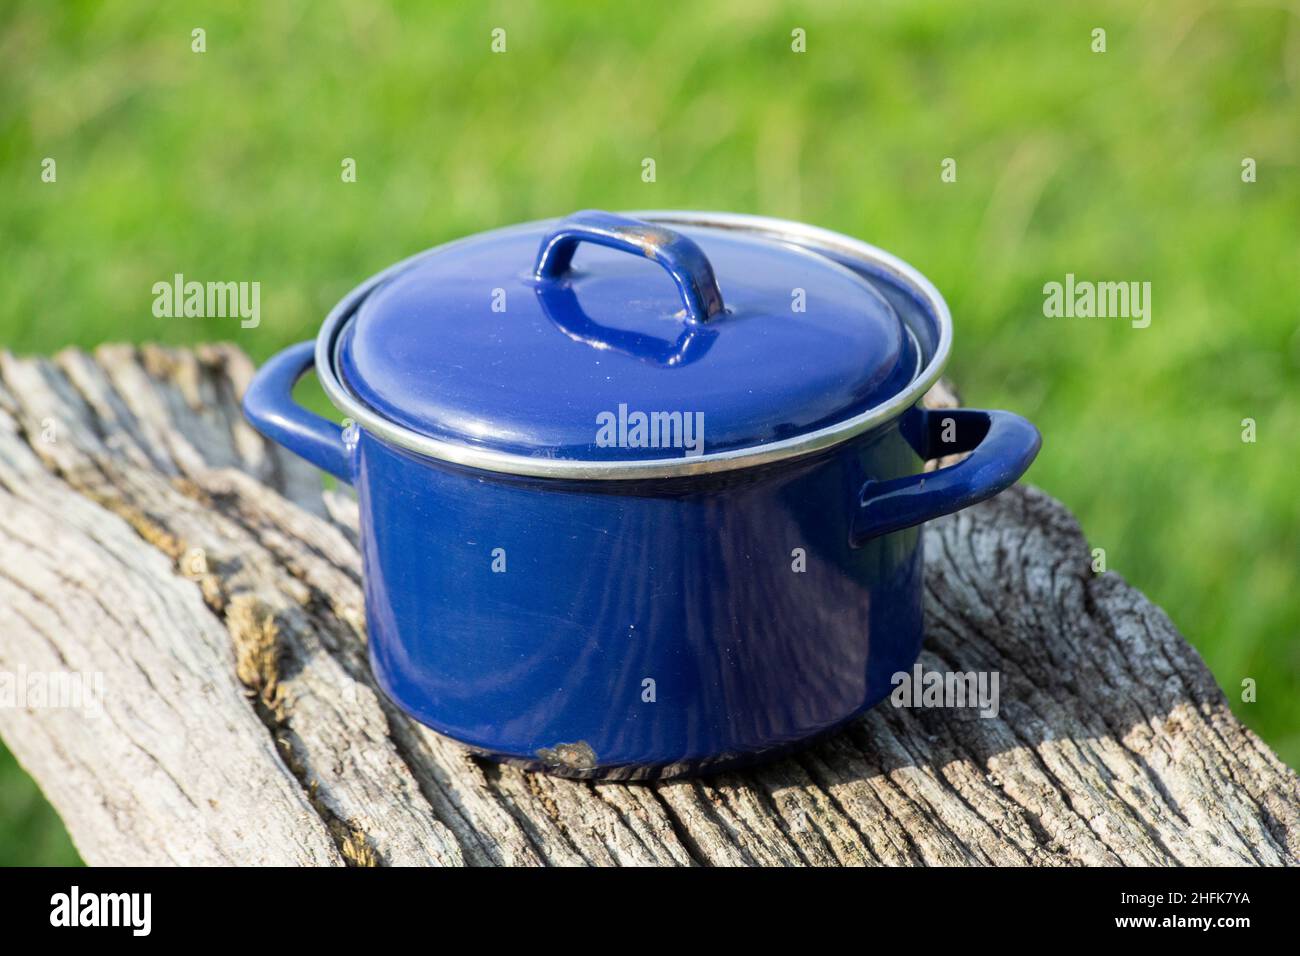 A old blue saucepan on an old wooden board. selective focus, out-of-focus green background Stock Photo